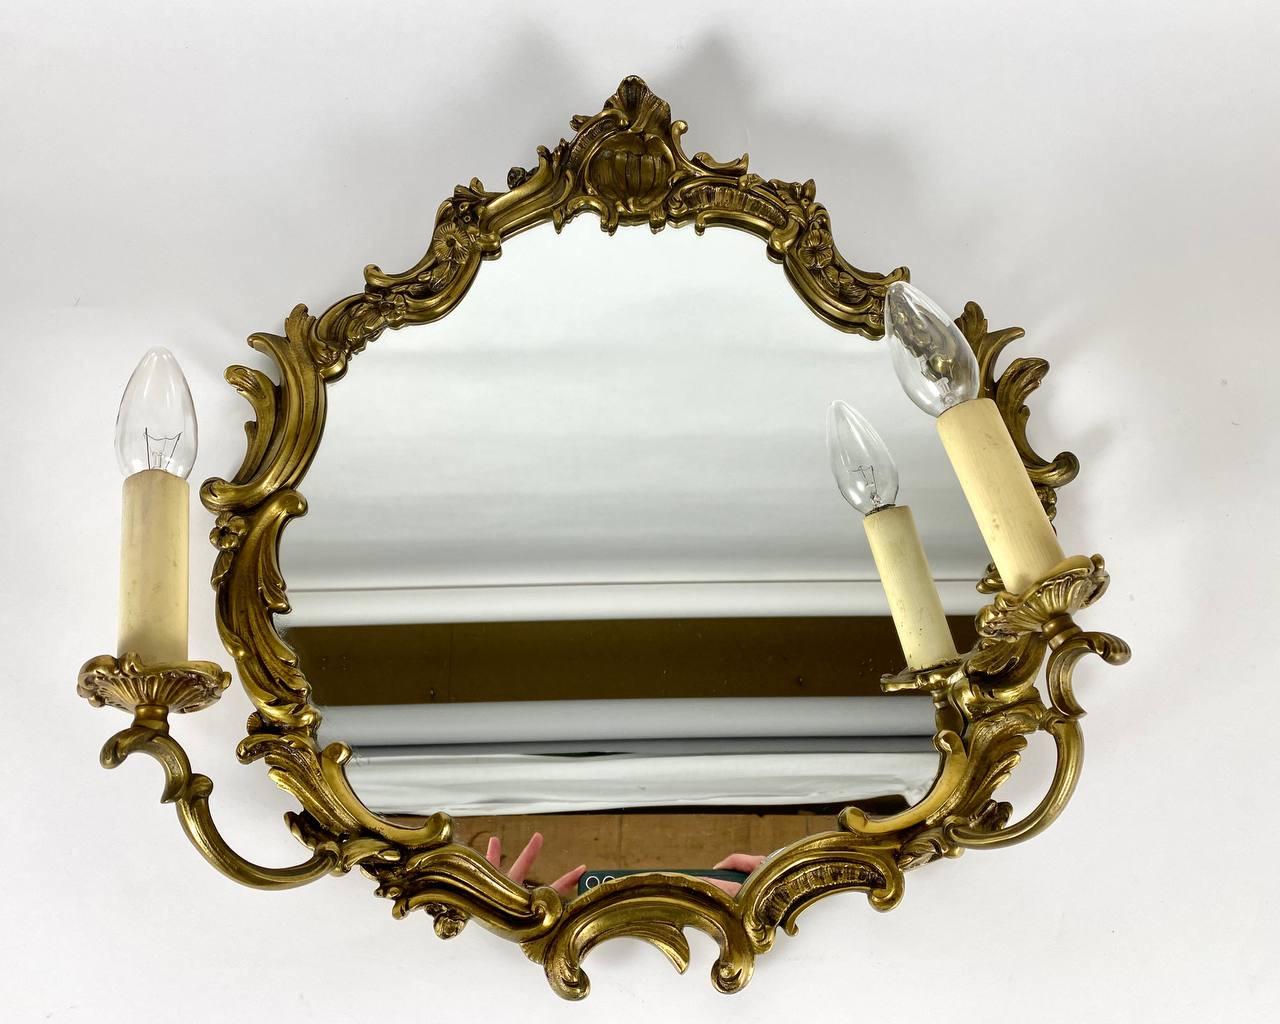 Baroque-style circa 20th century bronze colored brass two-light girandole mirror.

The oval shaped mirror with pierced scrolled acanthus cresting and flanked by pilasters and floral festoons.

The frame structure is made of brass. Very detailed